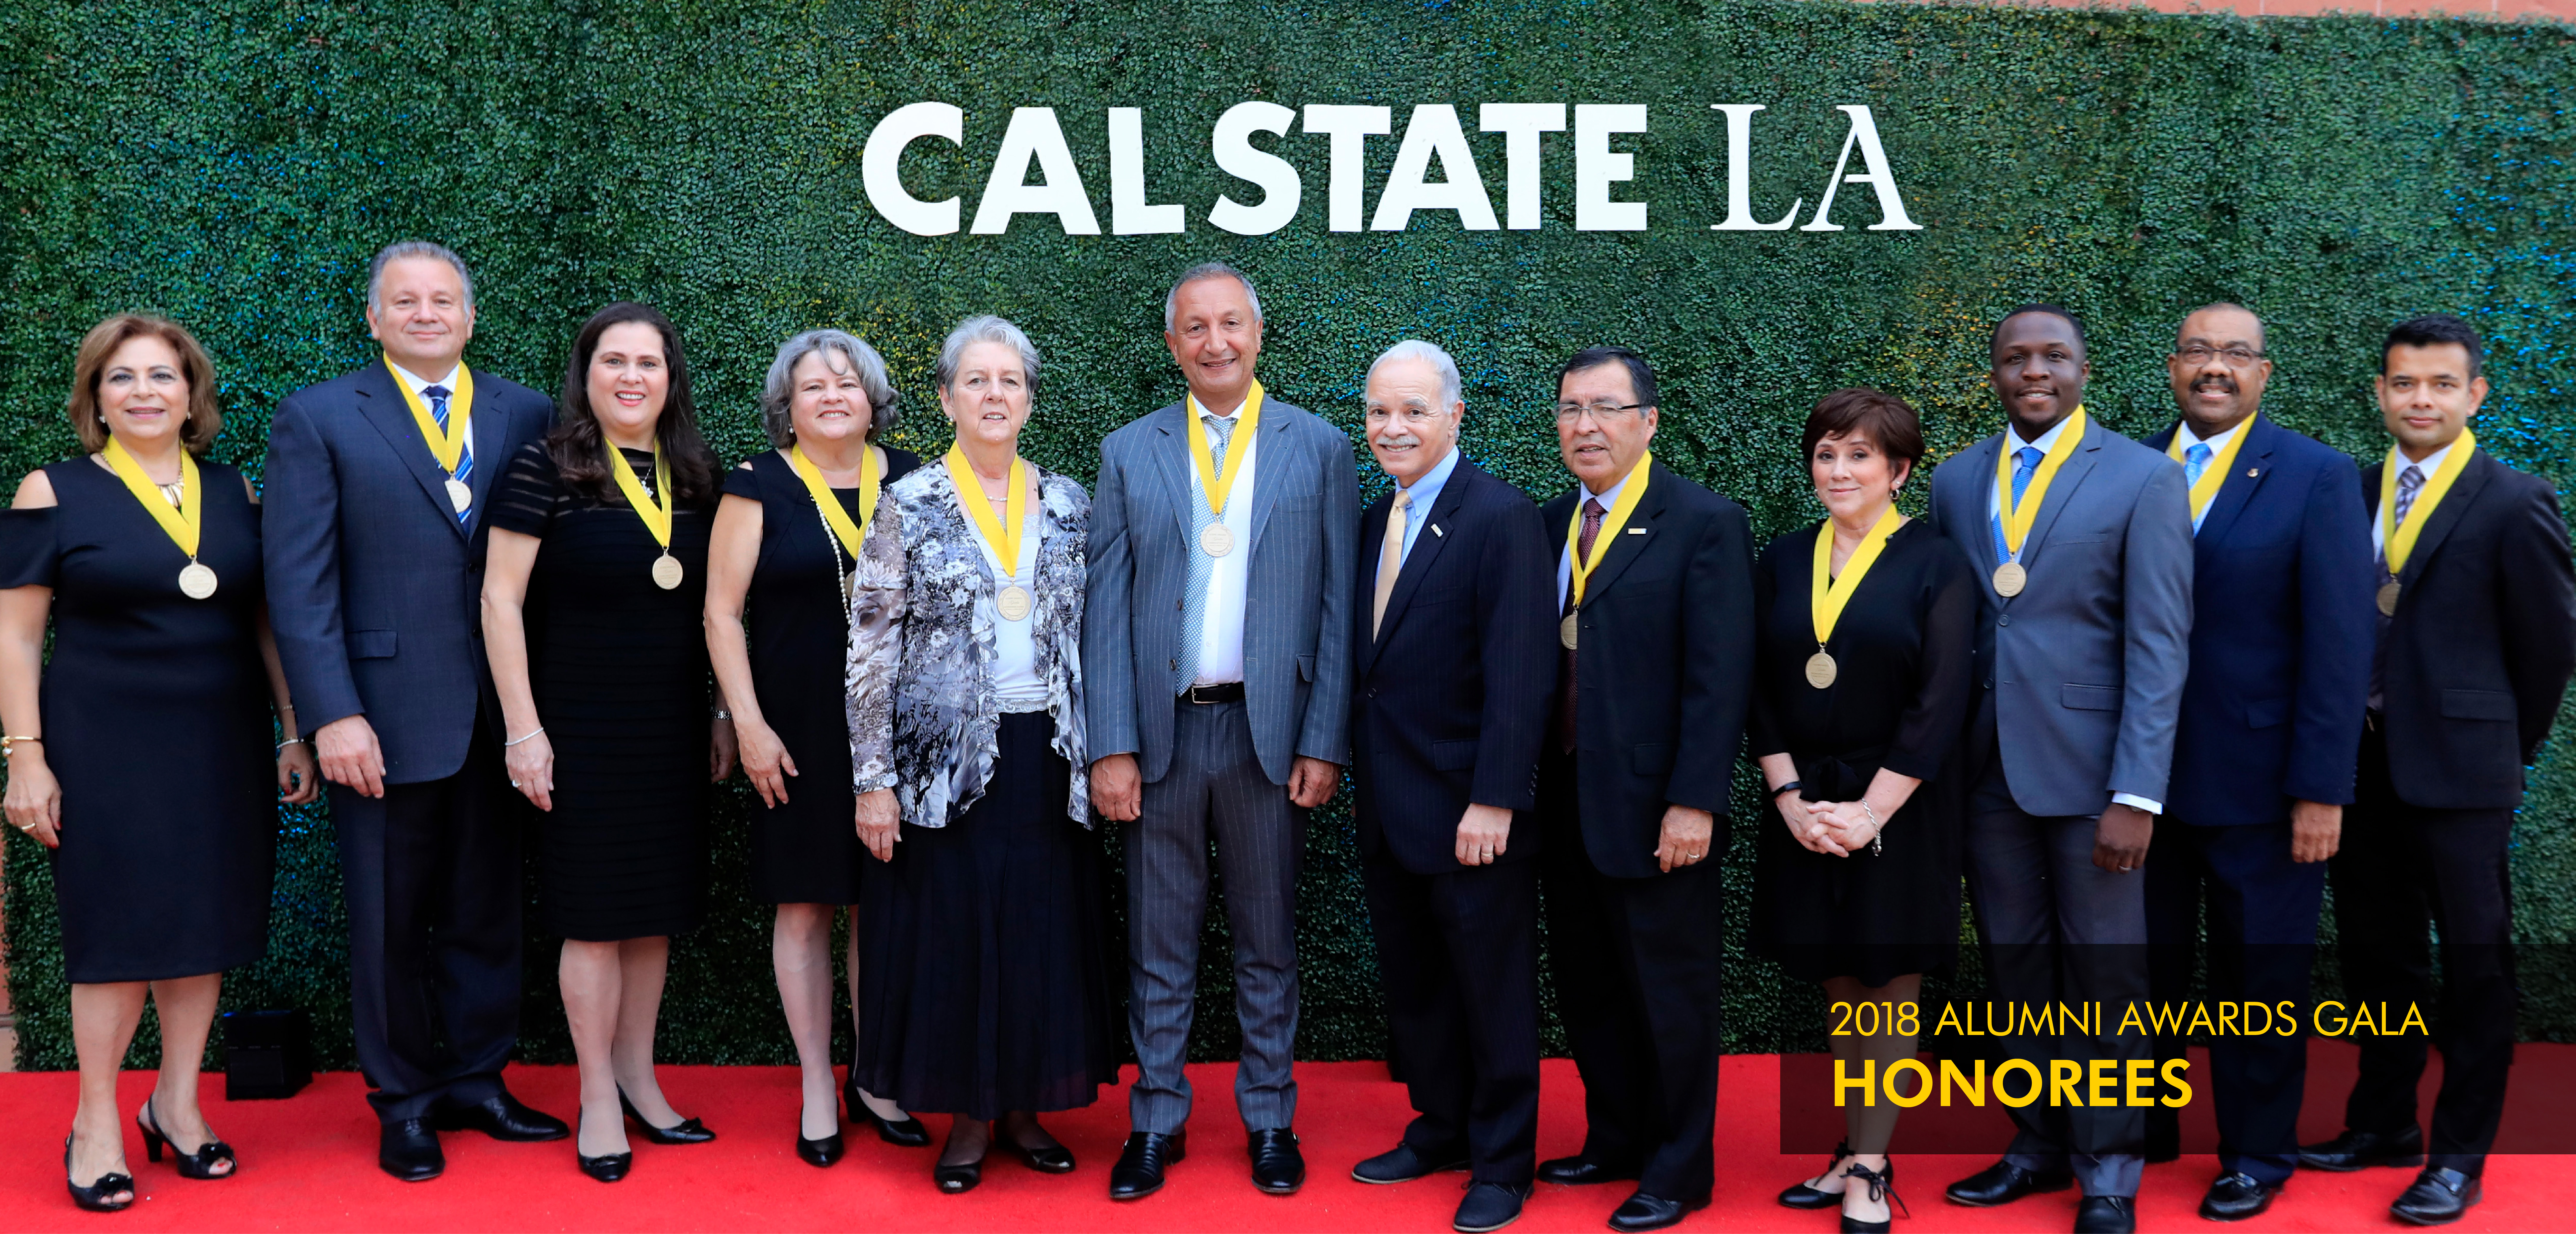 Group of Alumni Awards Gala honorees with President Covino